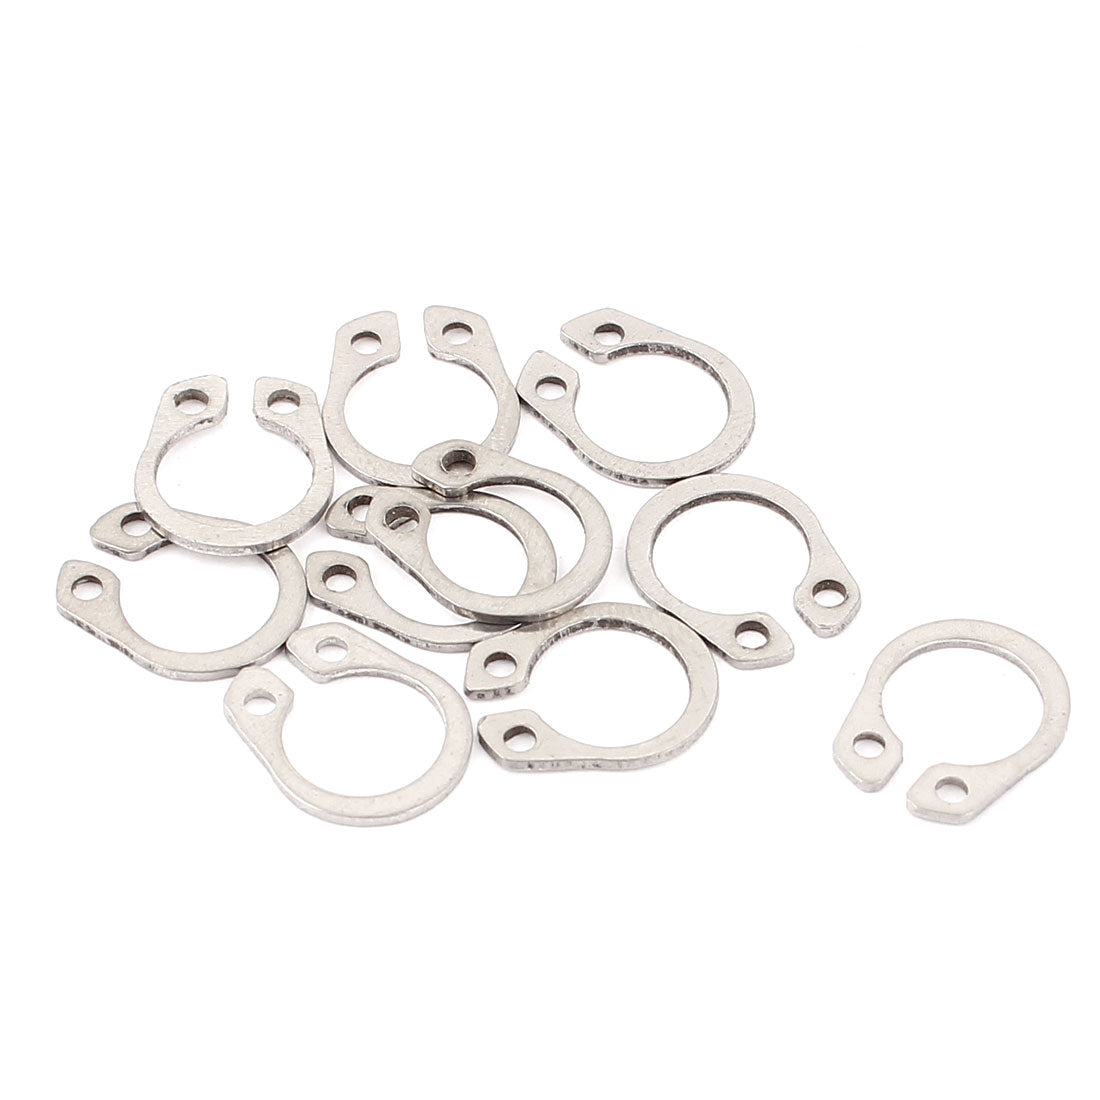 uxcell Uxcell 10pcs 304 Stainless Steel External Circlip Retaining Shaft Snap Rings 9mm